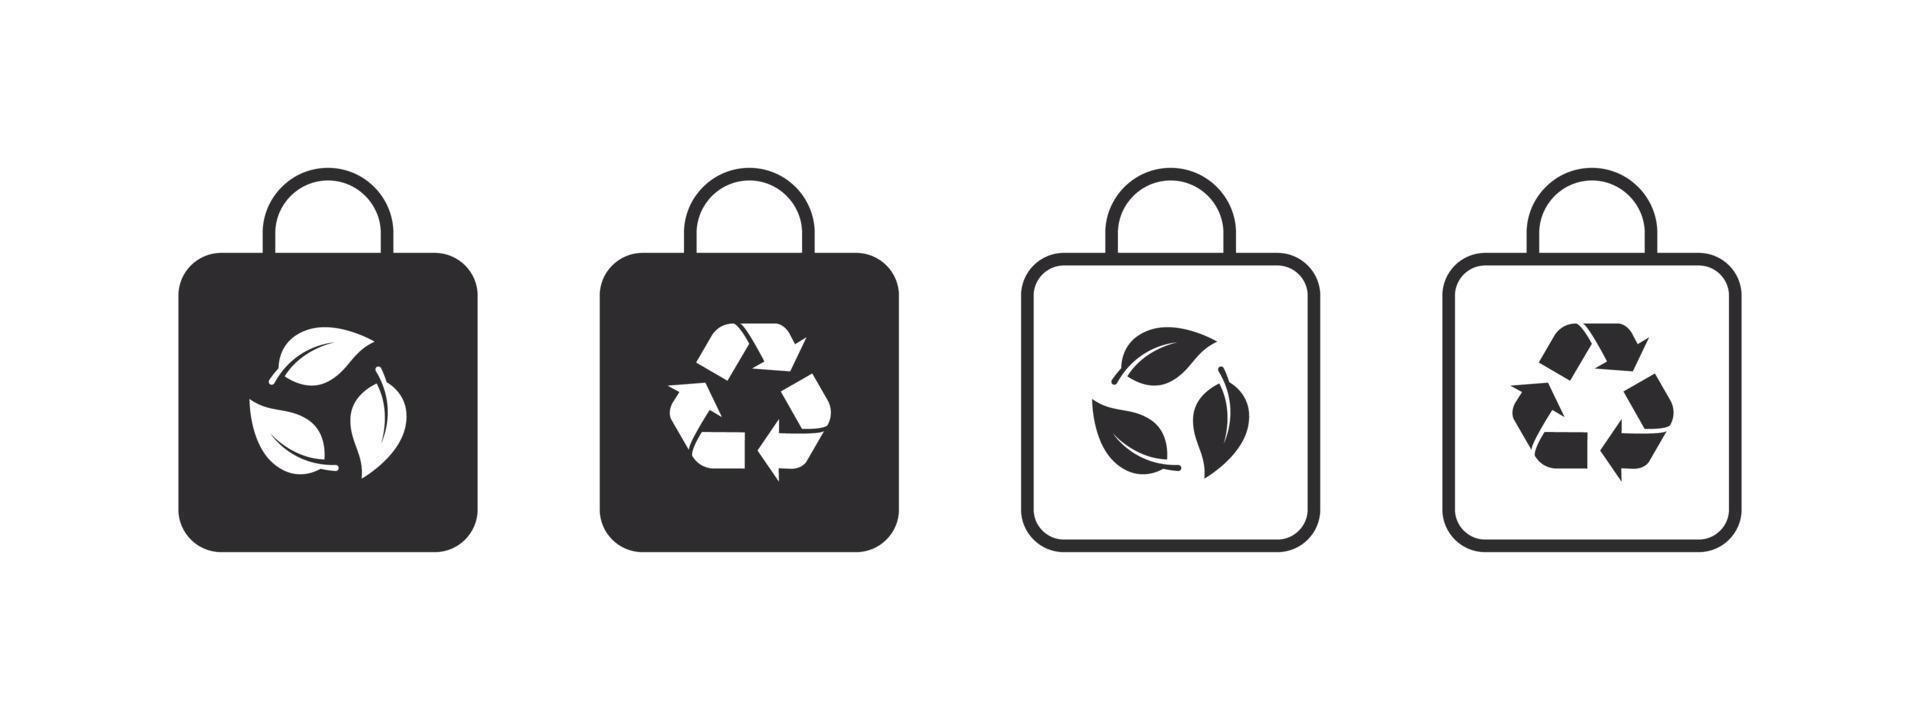 Recycled materials. Bag icons with recycling signs. Packaging and recycling. Vector illustration